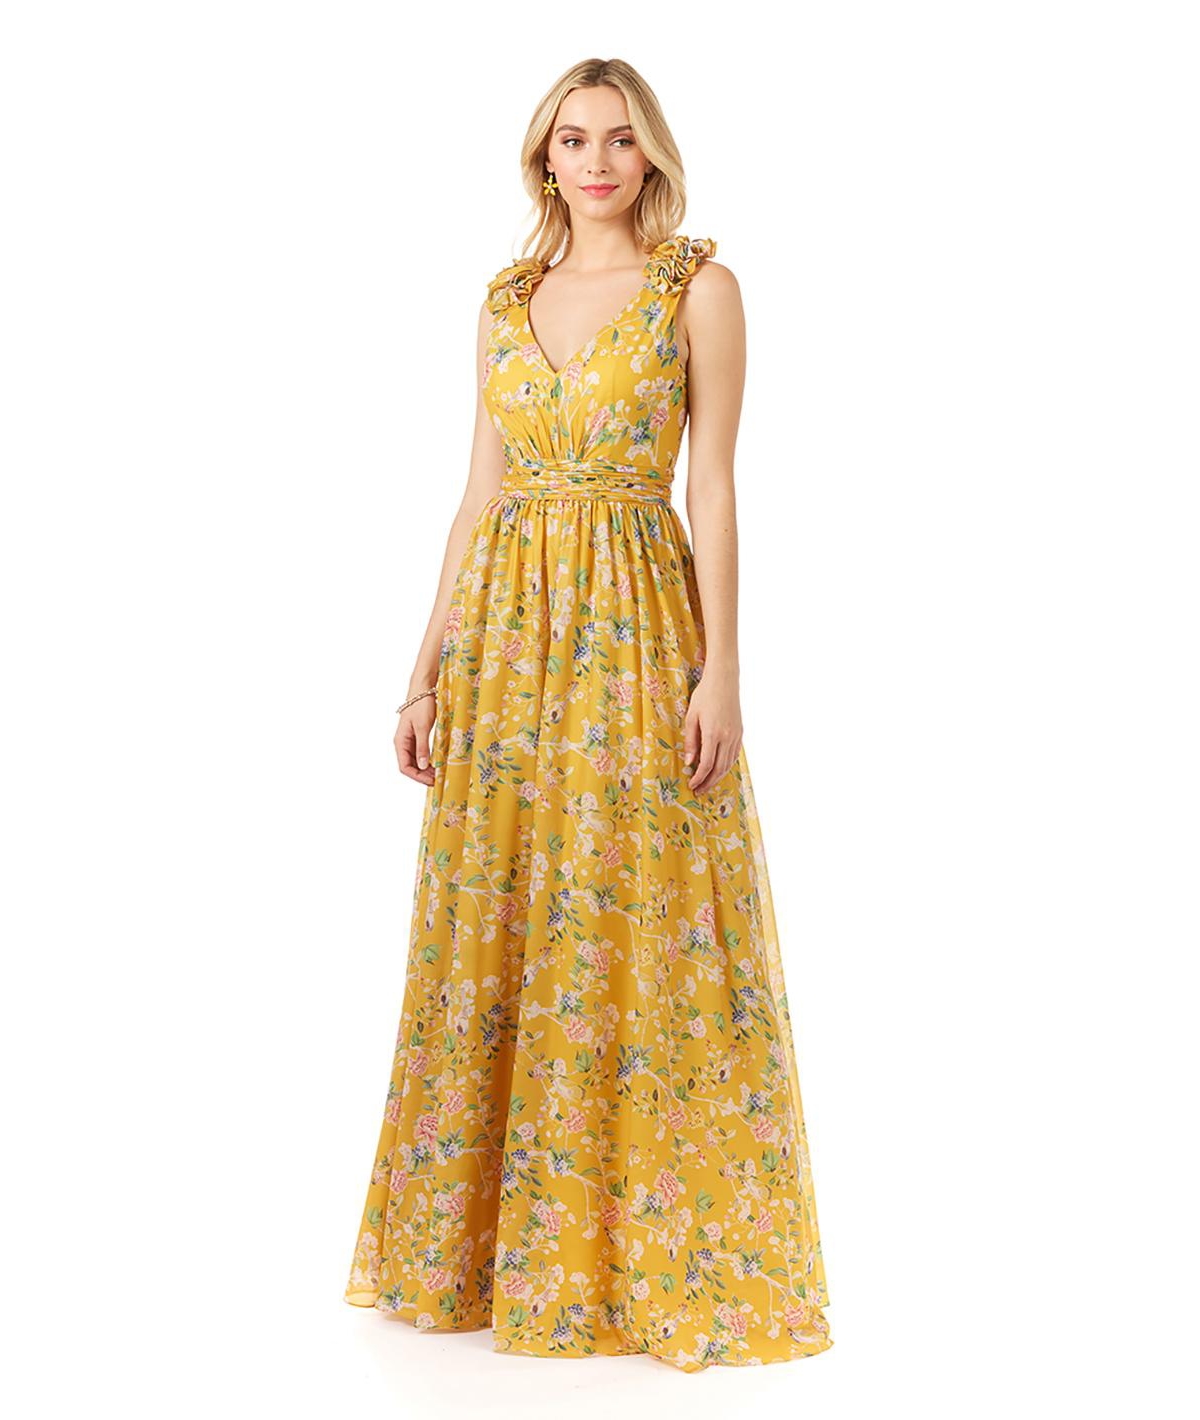 70s Prom, Formal, Evening, Party Dresses Womens V-Neck Long Print Gown with Straps - Yellow print $298.00 AT vintagedancer.com